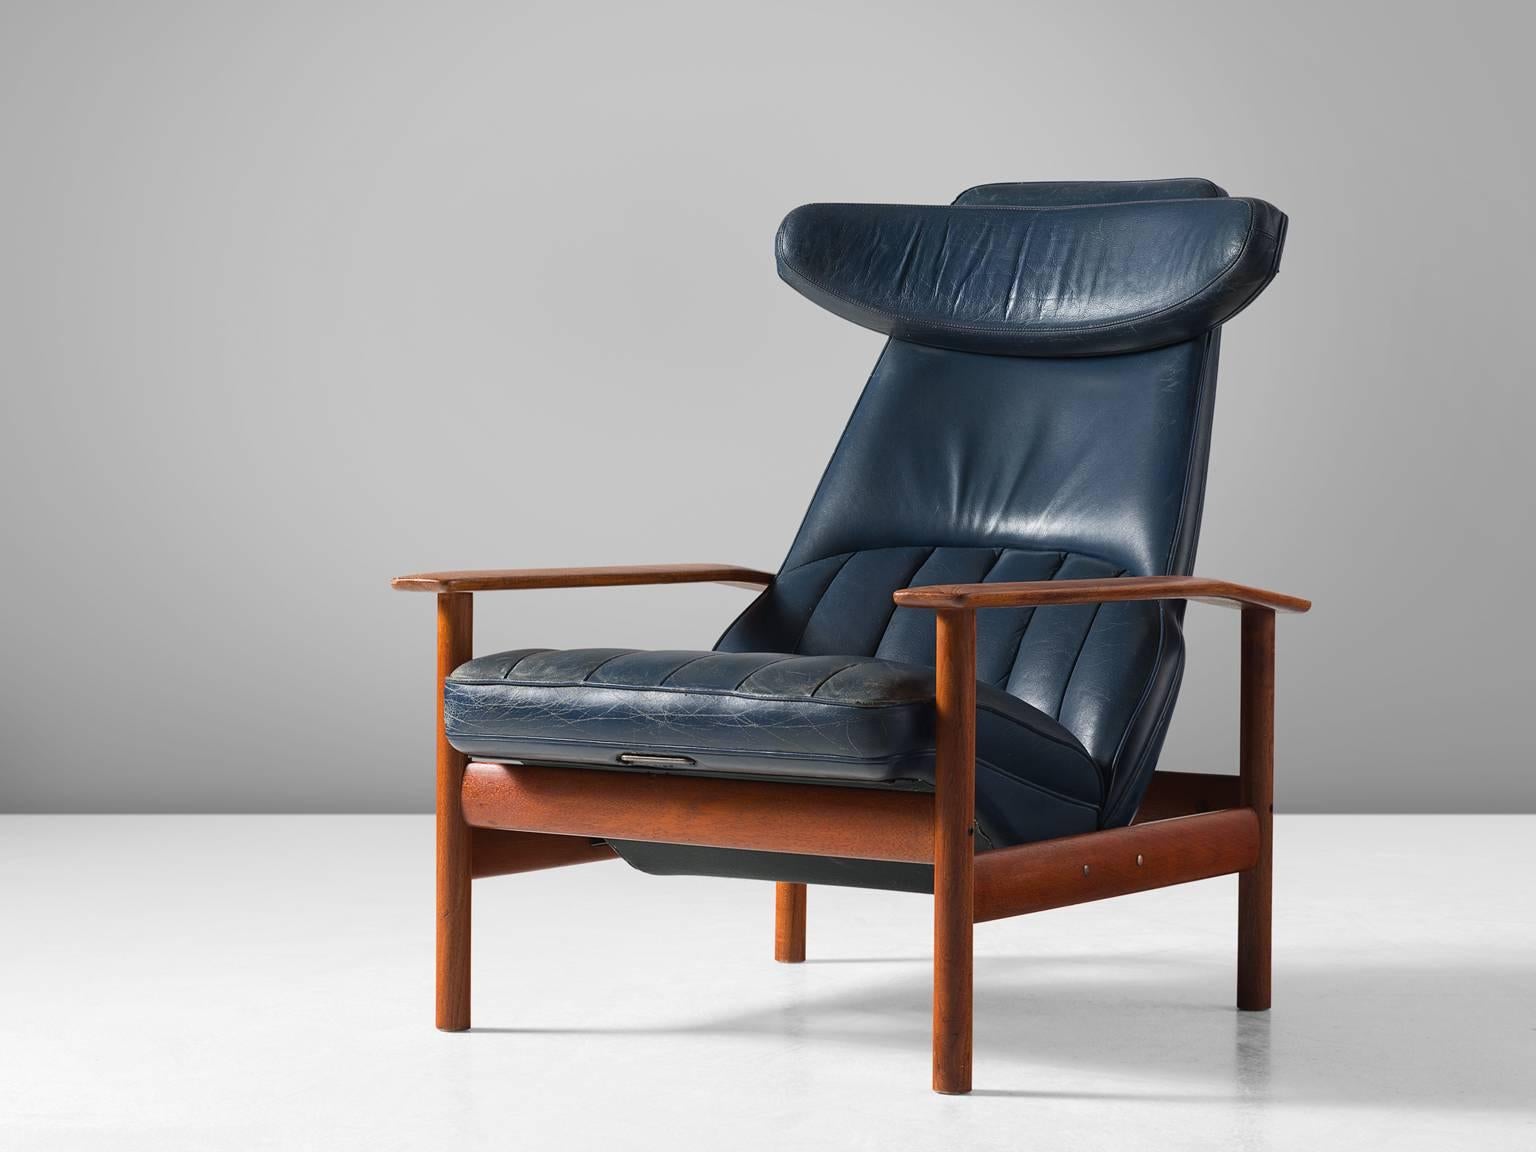 Sven Ivar Dysthe, lounge chair, teak and leather, Norway, 1960s.

This easy chair by Sven Ivar Dysthe with solid teak frame. The chair is adjustable in two positions to maximize comfort. The seat is covered in its original dark blue skai in a